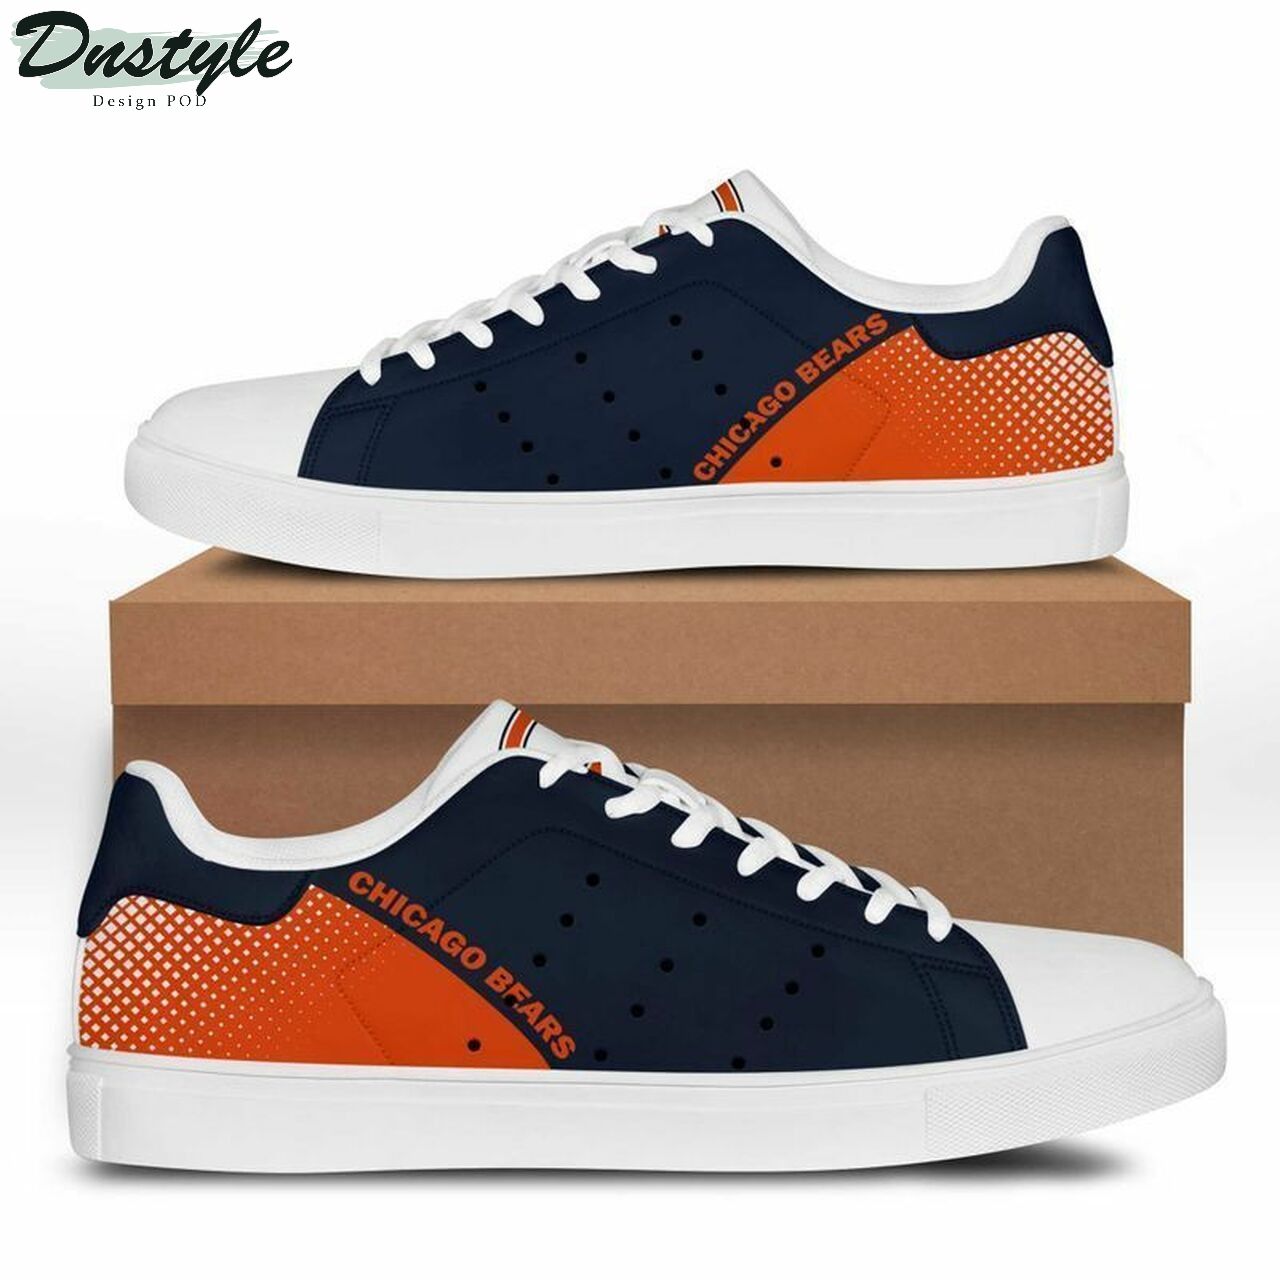 NFL Chicago Bears stan smith low top skate shoes